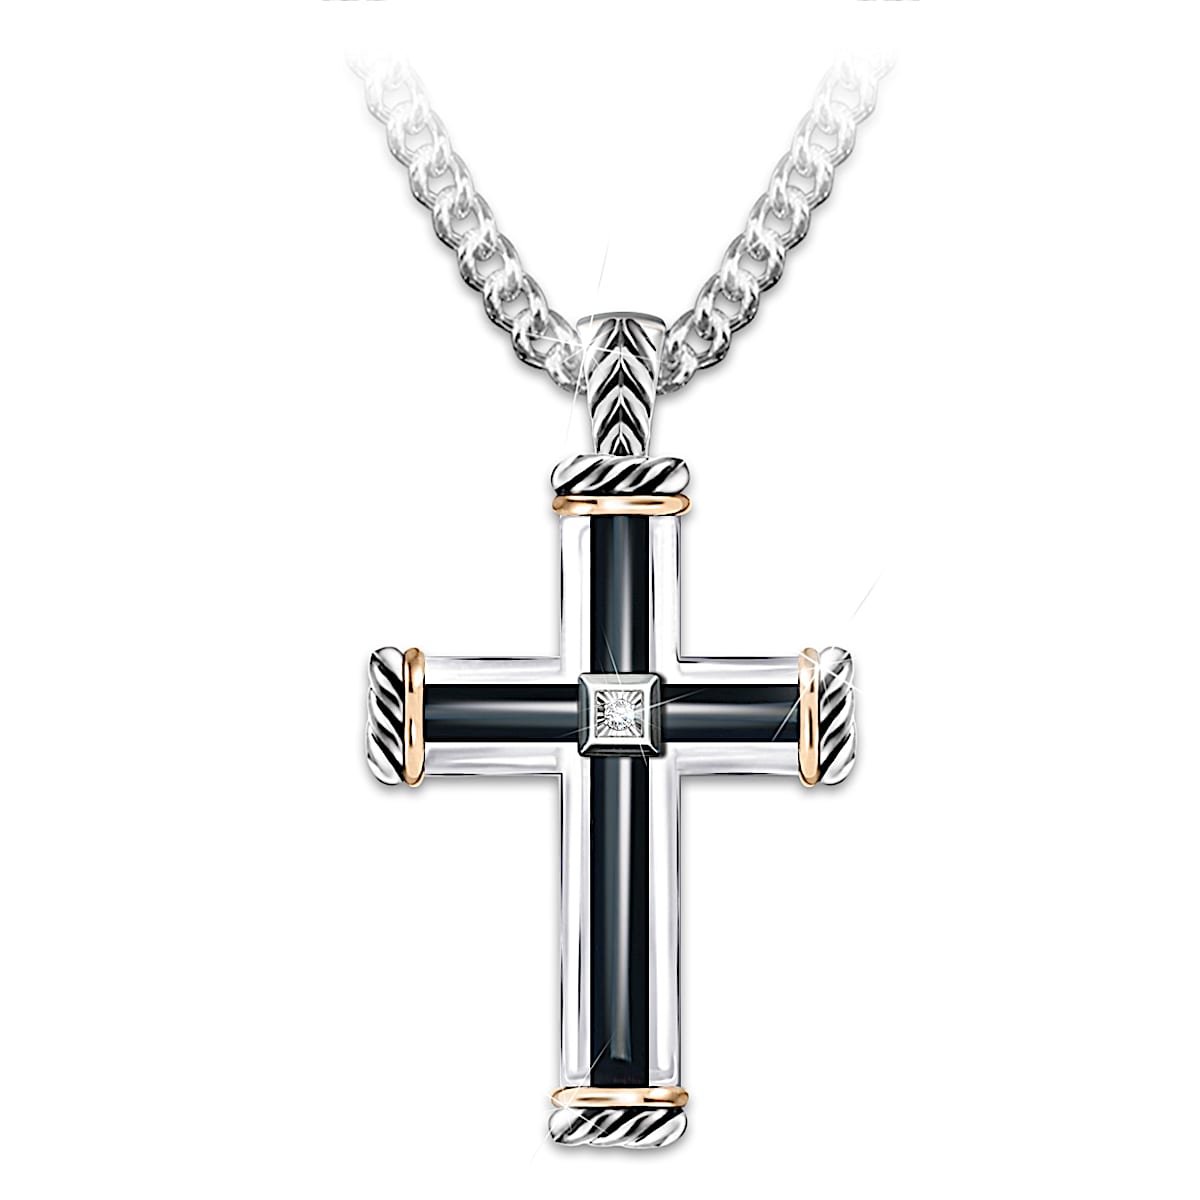 Up To 90% Off on Men's Cross Necklaces in Stai... | Groupon Goods